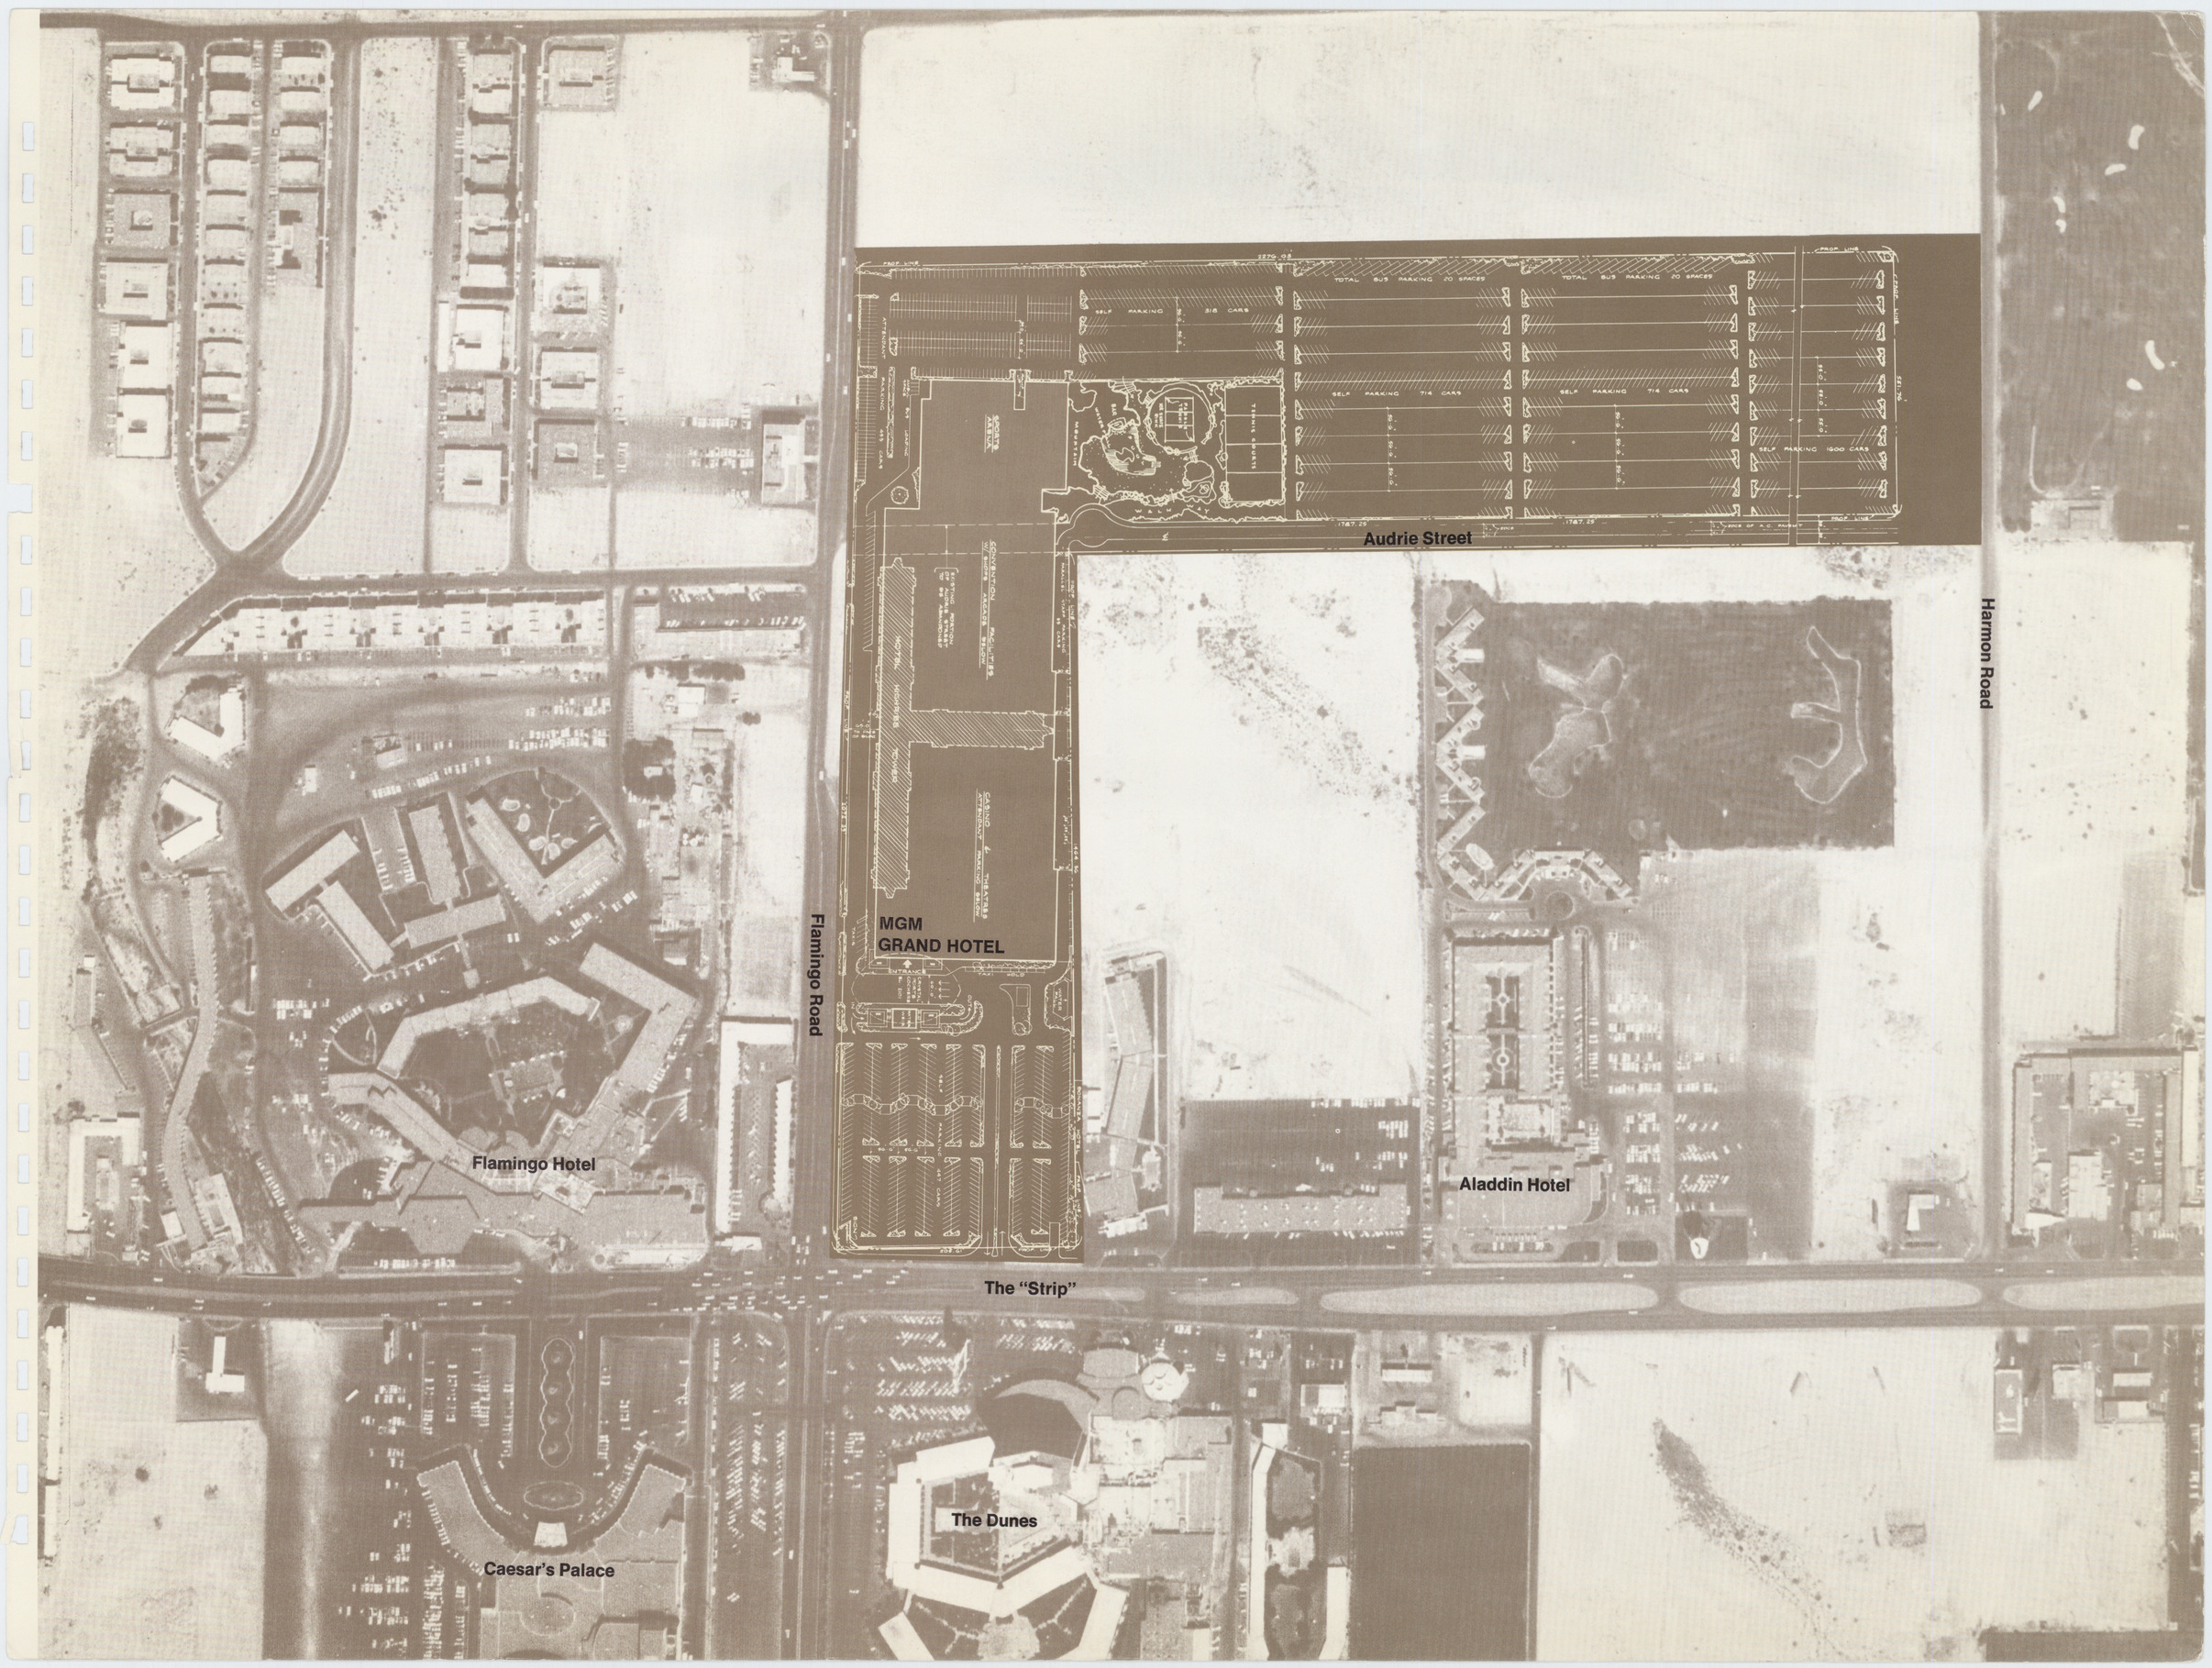 Proposal for the MGM Grand Hotel (Las Vegas), circa 1972, image 19